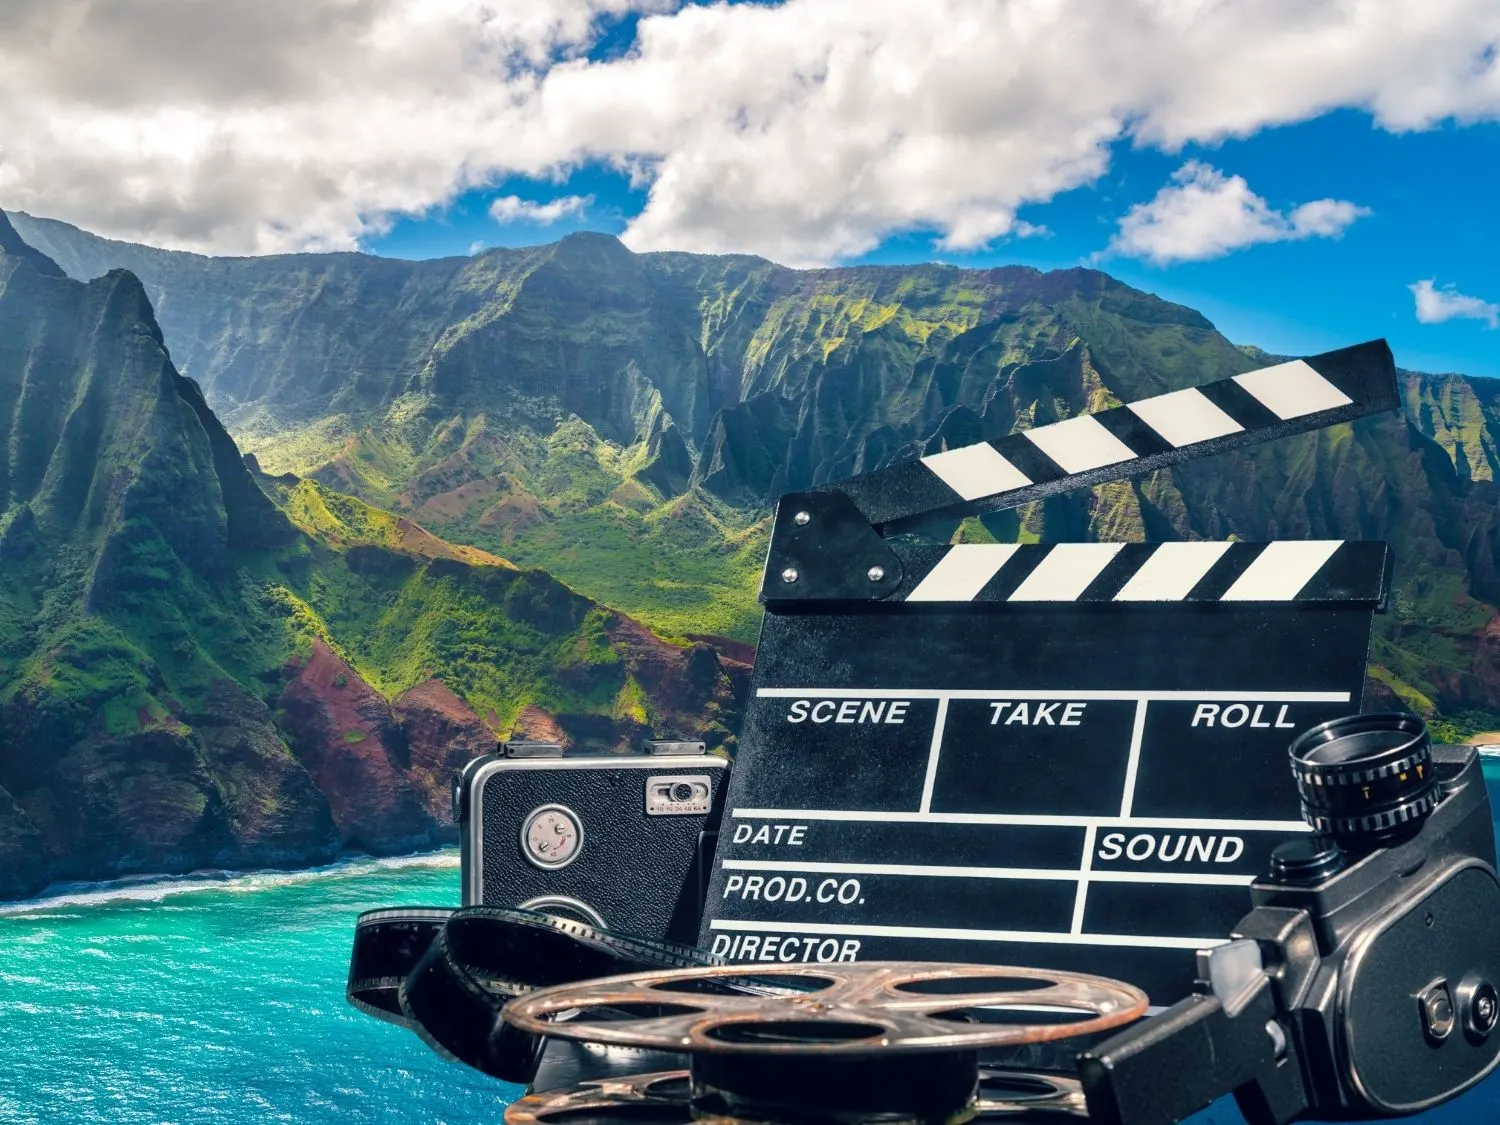 7 Extraordinary Movies Set In Hawaii That Will Inspire You To Visit!